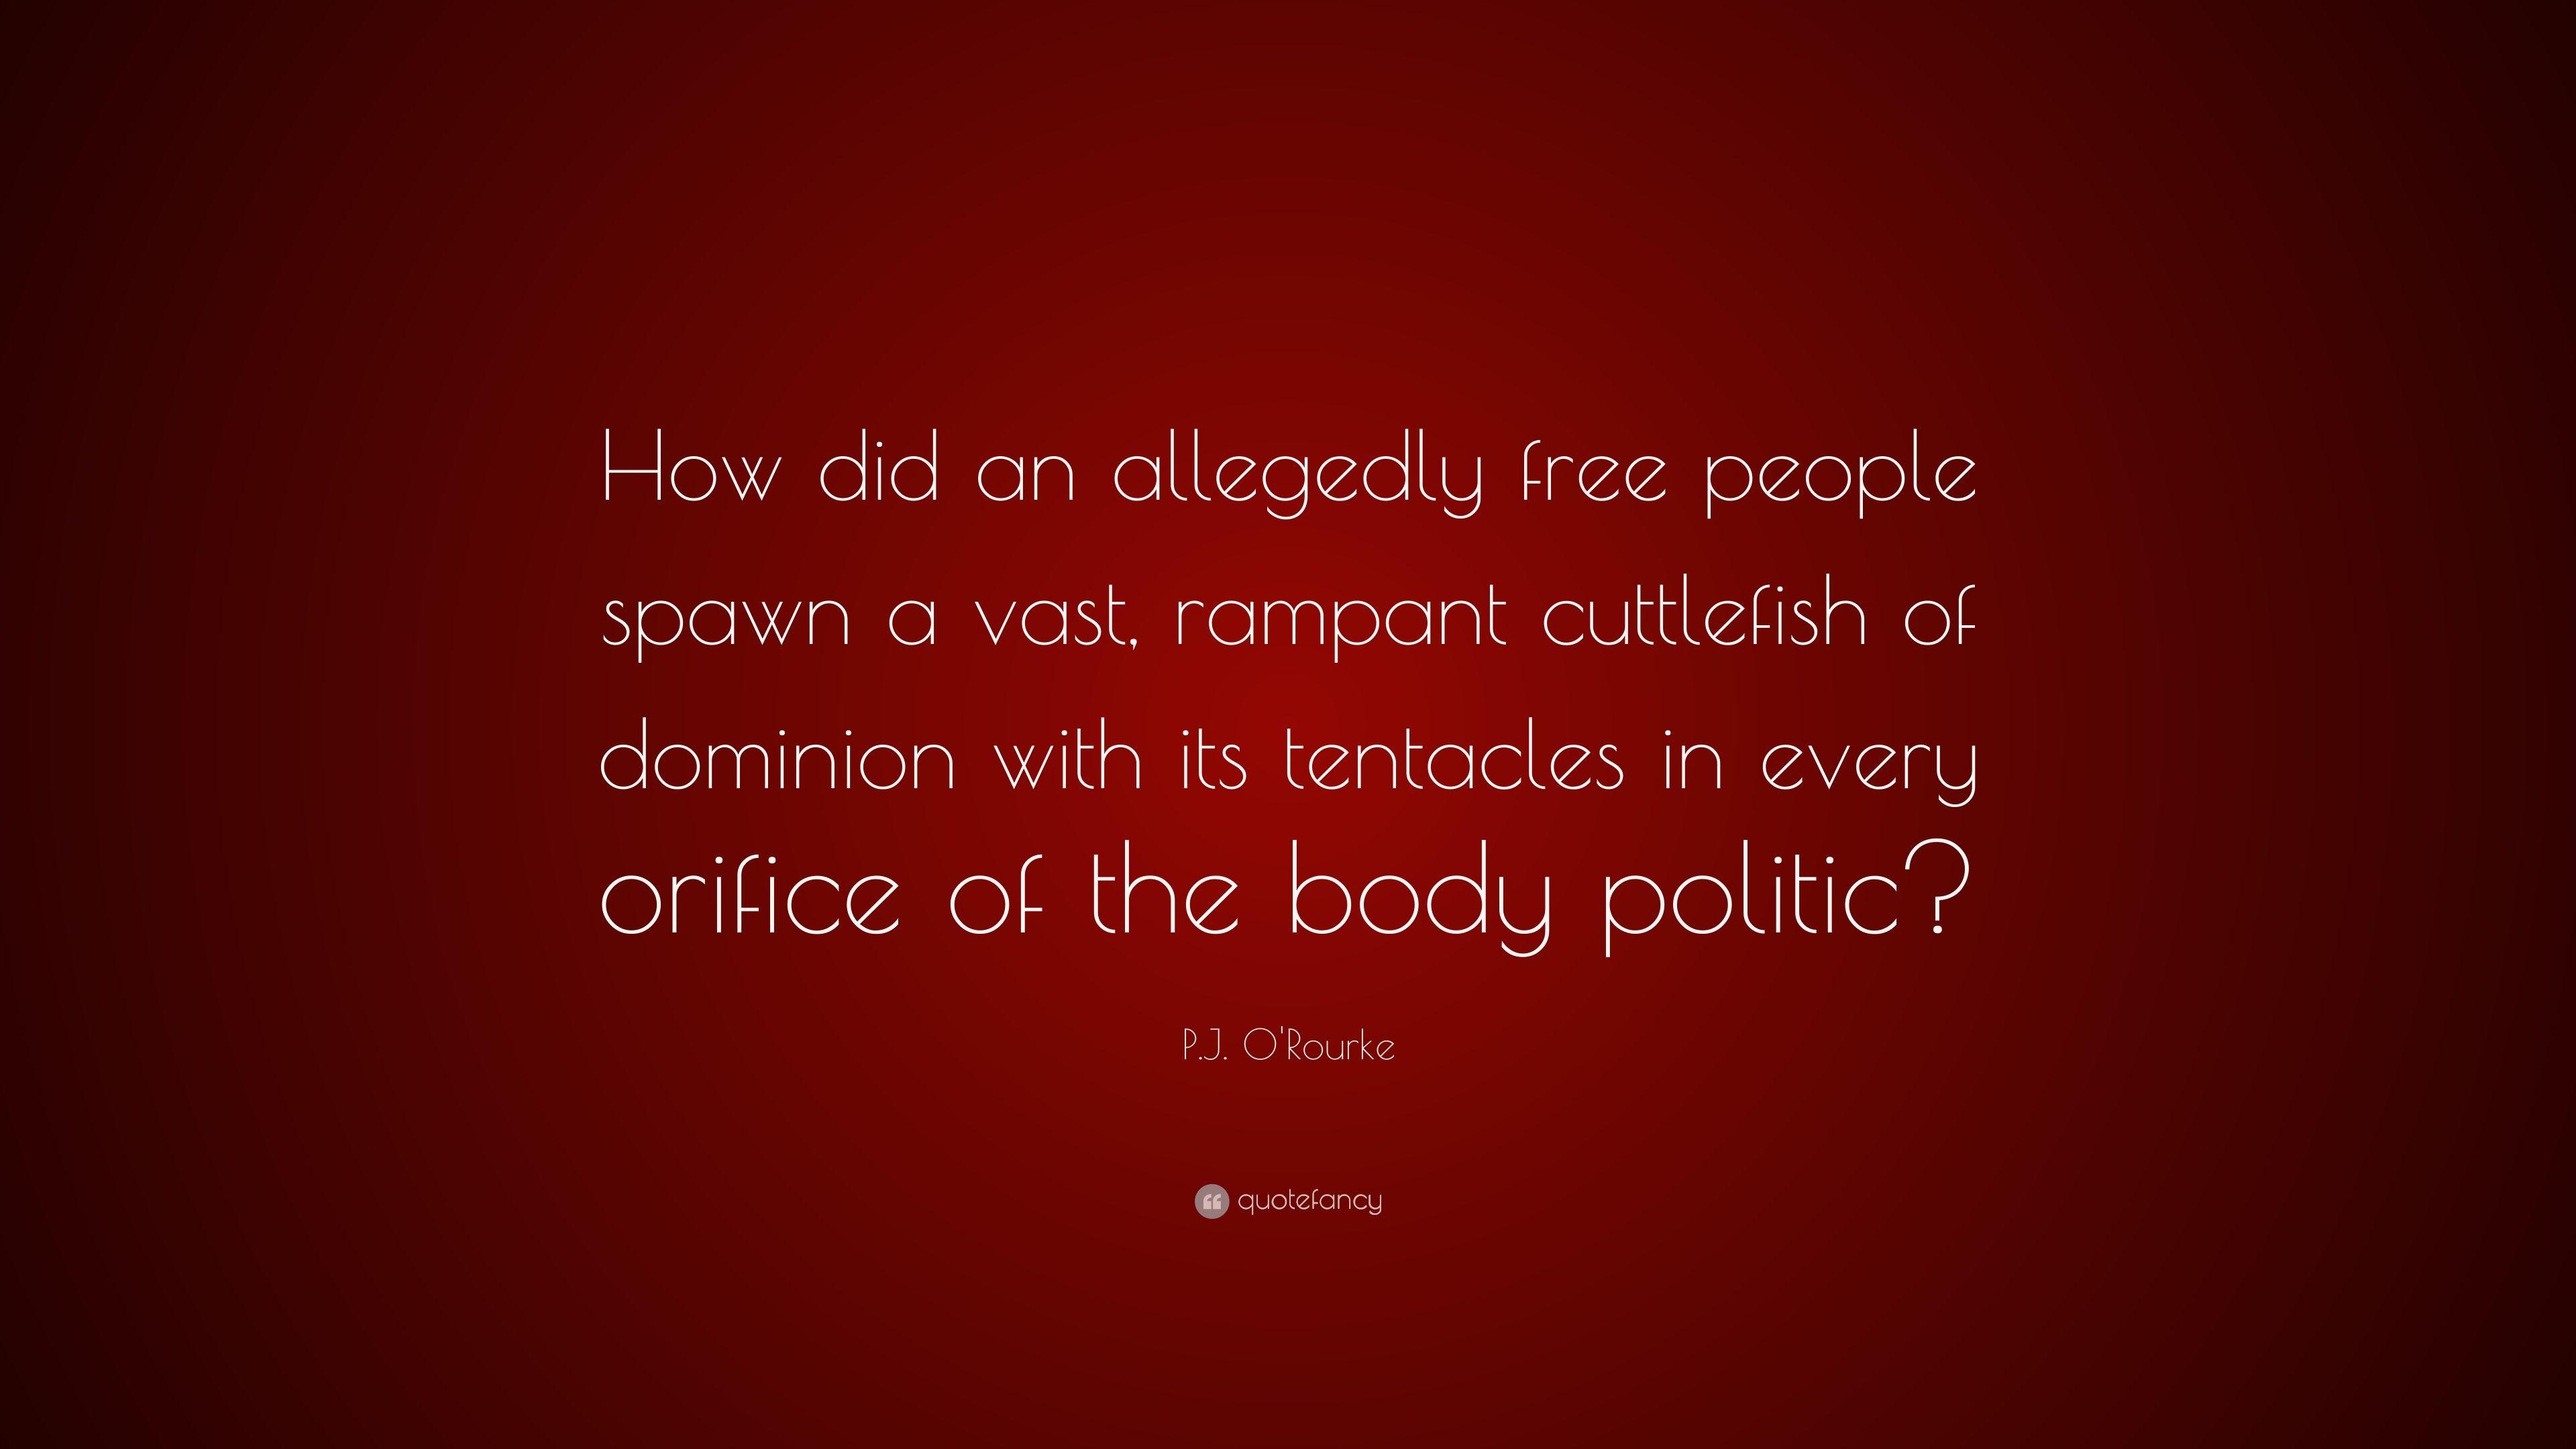 P.J. O'Rourke Quote: “How did an allegedly free people spawn a